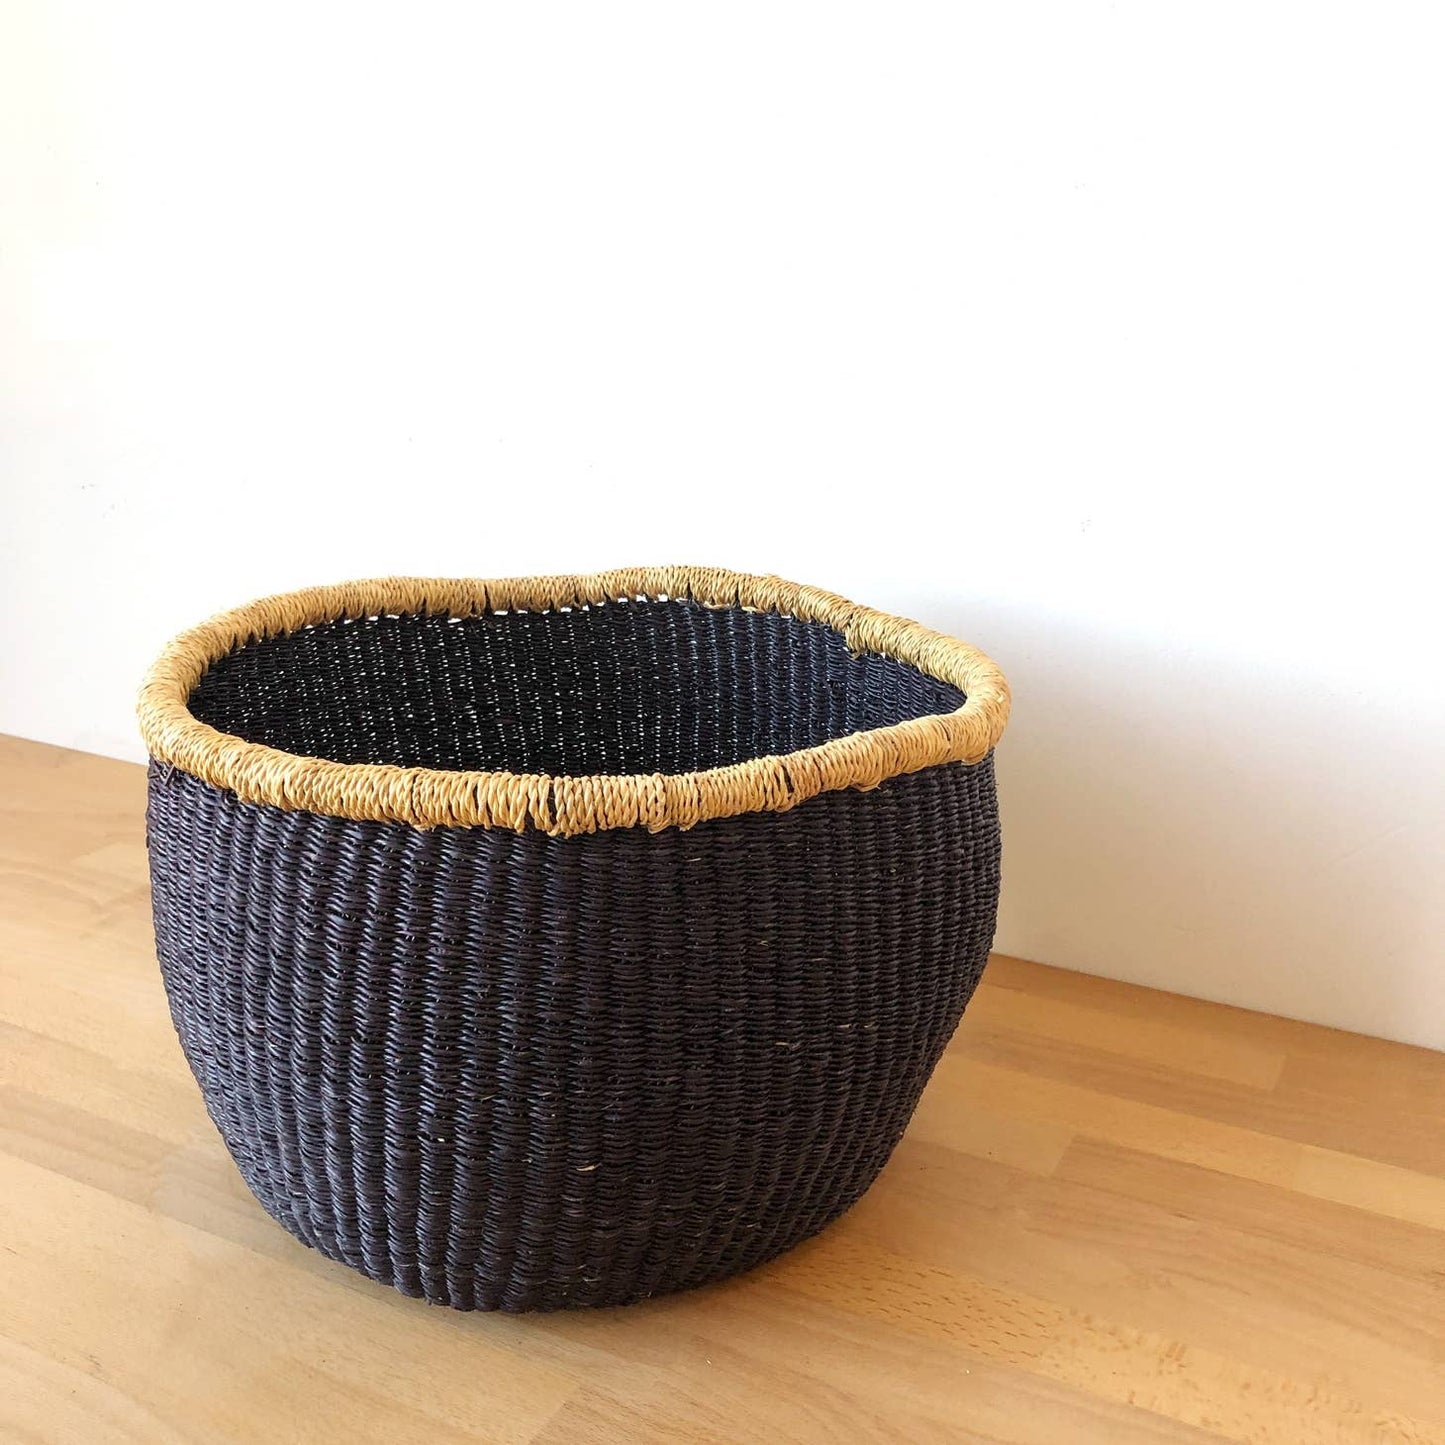 This storage basket is great for holding blankets, toys, knitting supplies and other things.  It is handwoven from veta vera grass in northern Ghana. The grass is dried, split, rolled, and dyed, before being woven into this beautiful work of art.